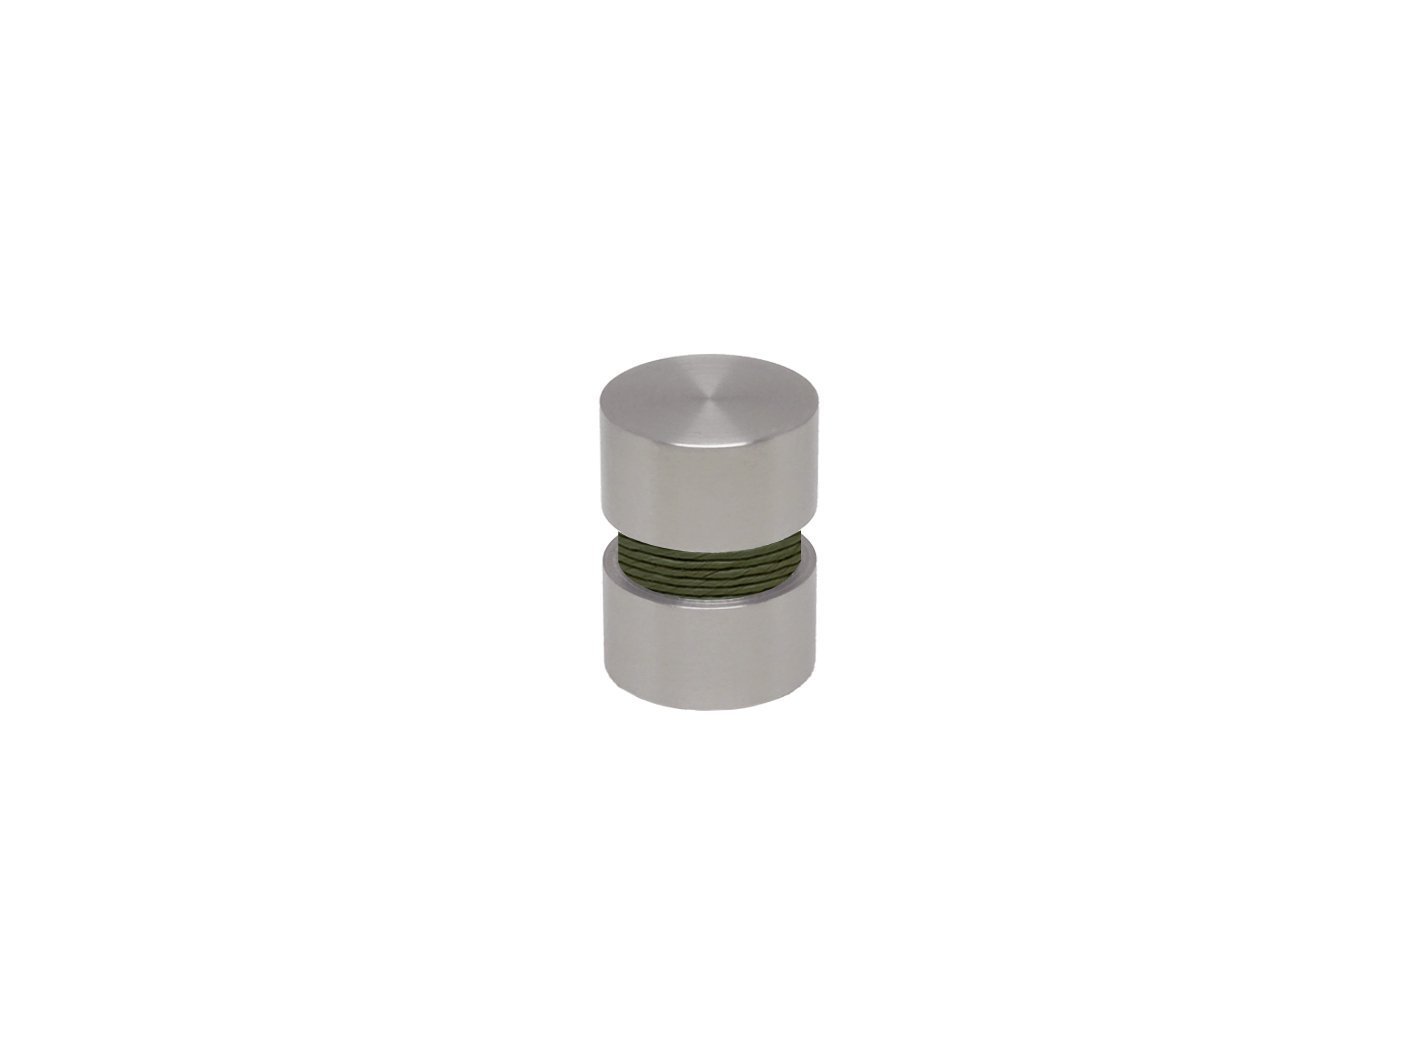 Dark green curtain pole finial, stainless steel groove, for 19mm diameter curtain pole